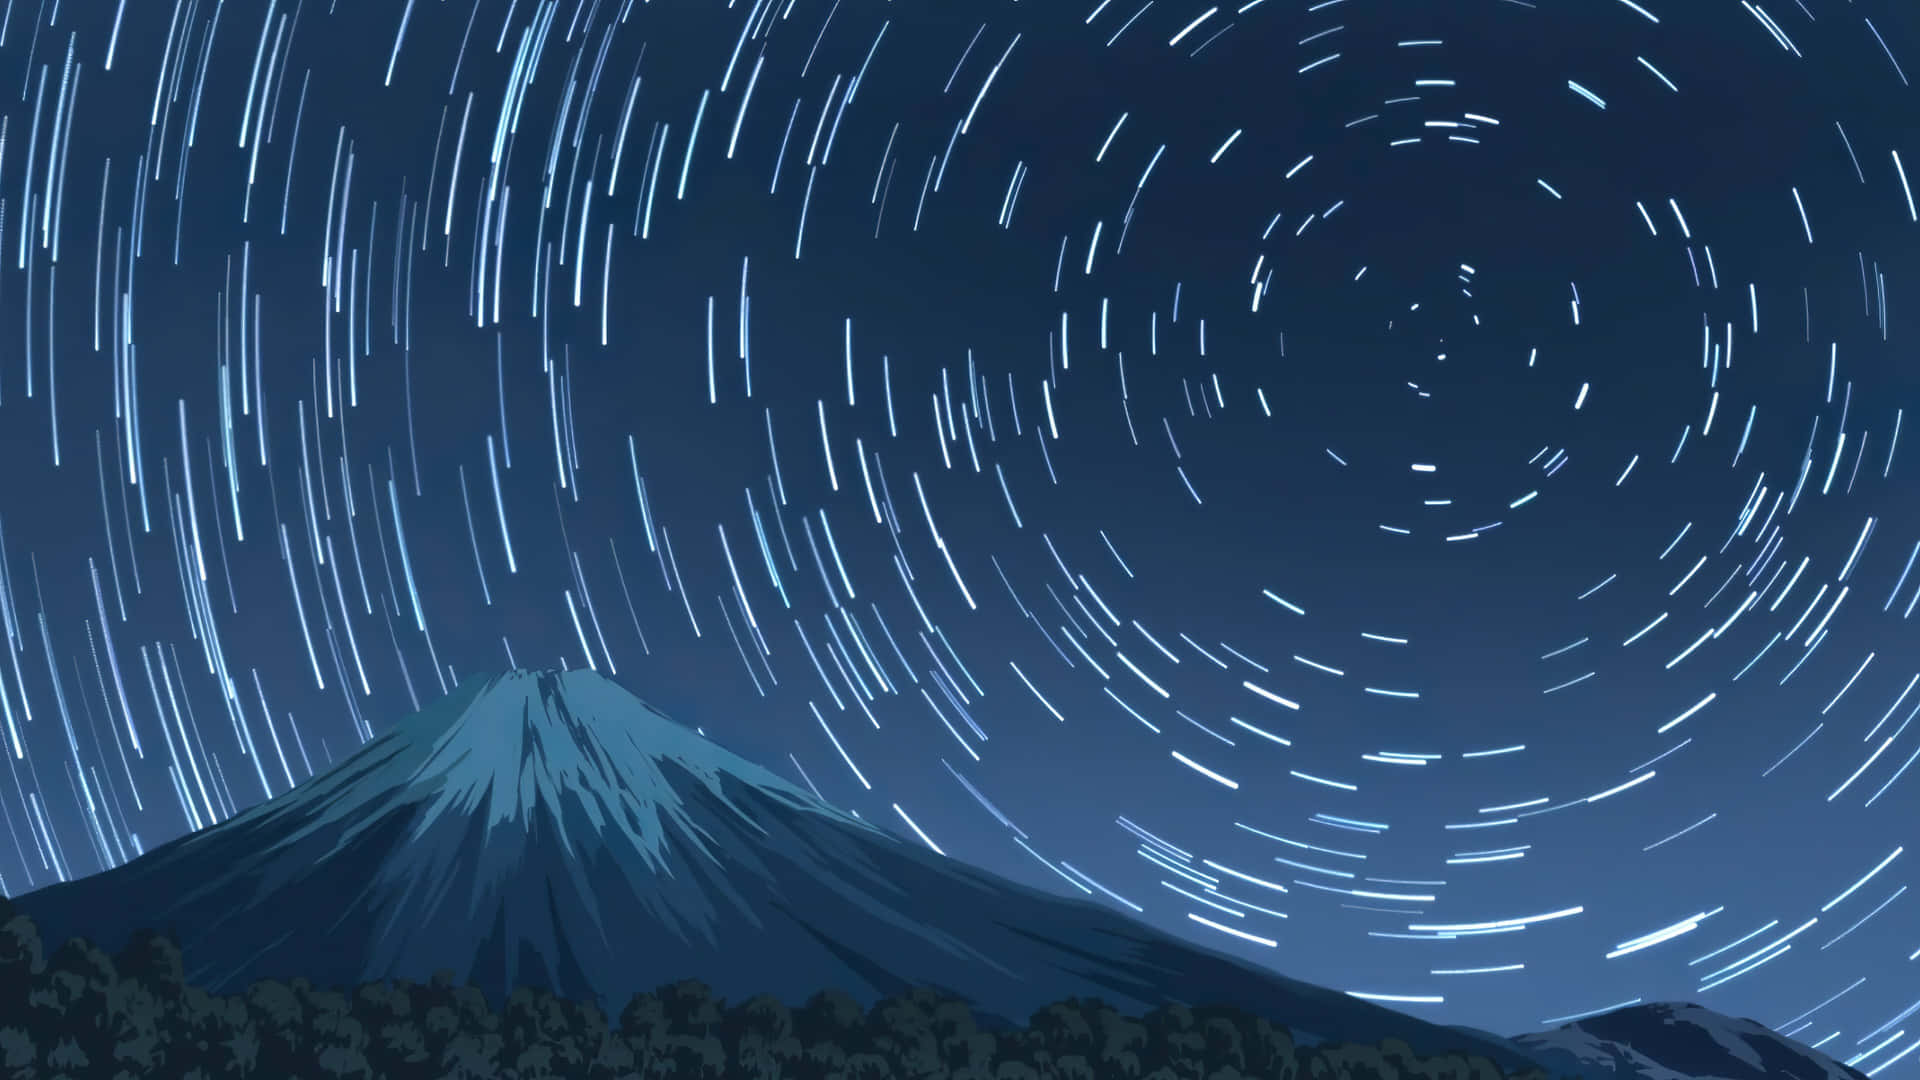 Camp Camp Mountain And Star Trails Wallpaper